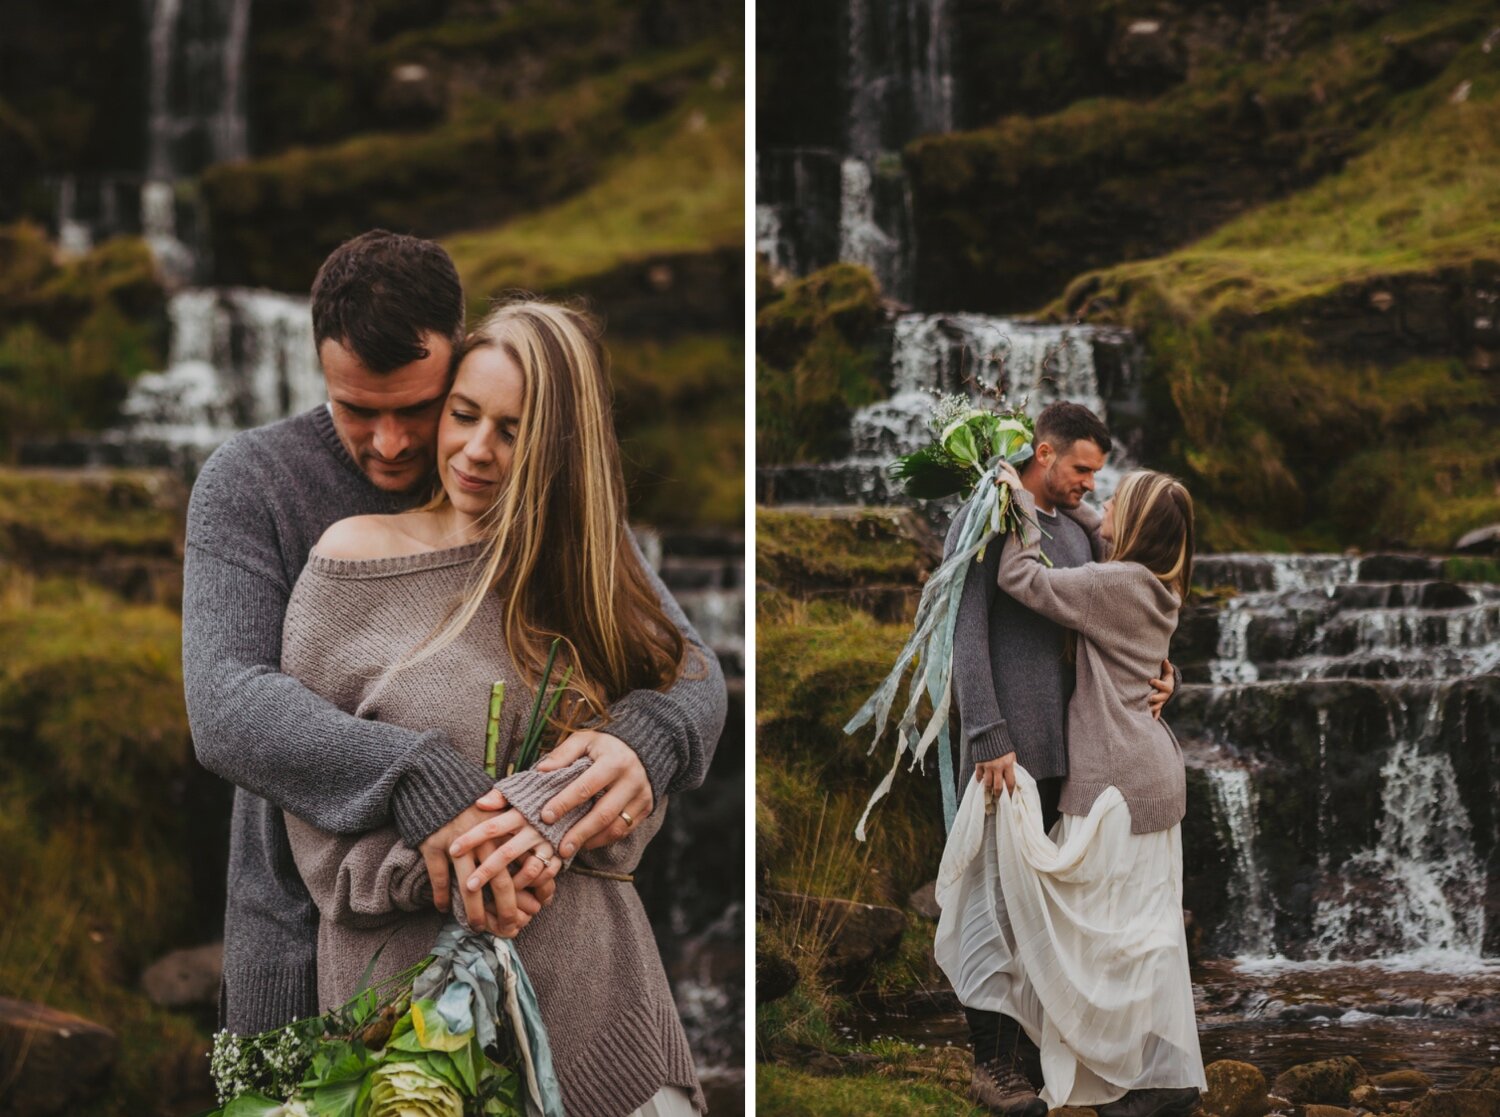 18_TWS-113_TWS-92__grey_landscape_dramatic_alternative_elope_alt_rock_blue_offbeat_winter_flowers_waterfall_dales_waterfalls_autumn_elopement_photography_ribbons_moody_bride_silver_wedding_yorkshire_rainy_cloudy_cosy_weather_photographer_florals_groom.jpg